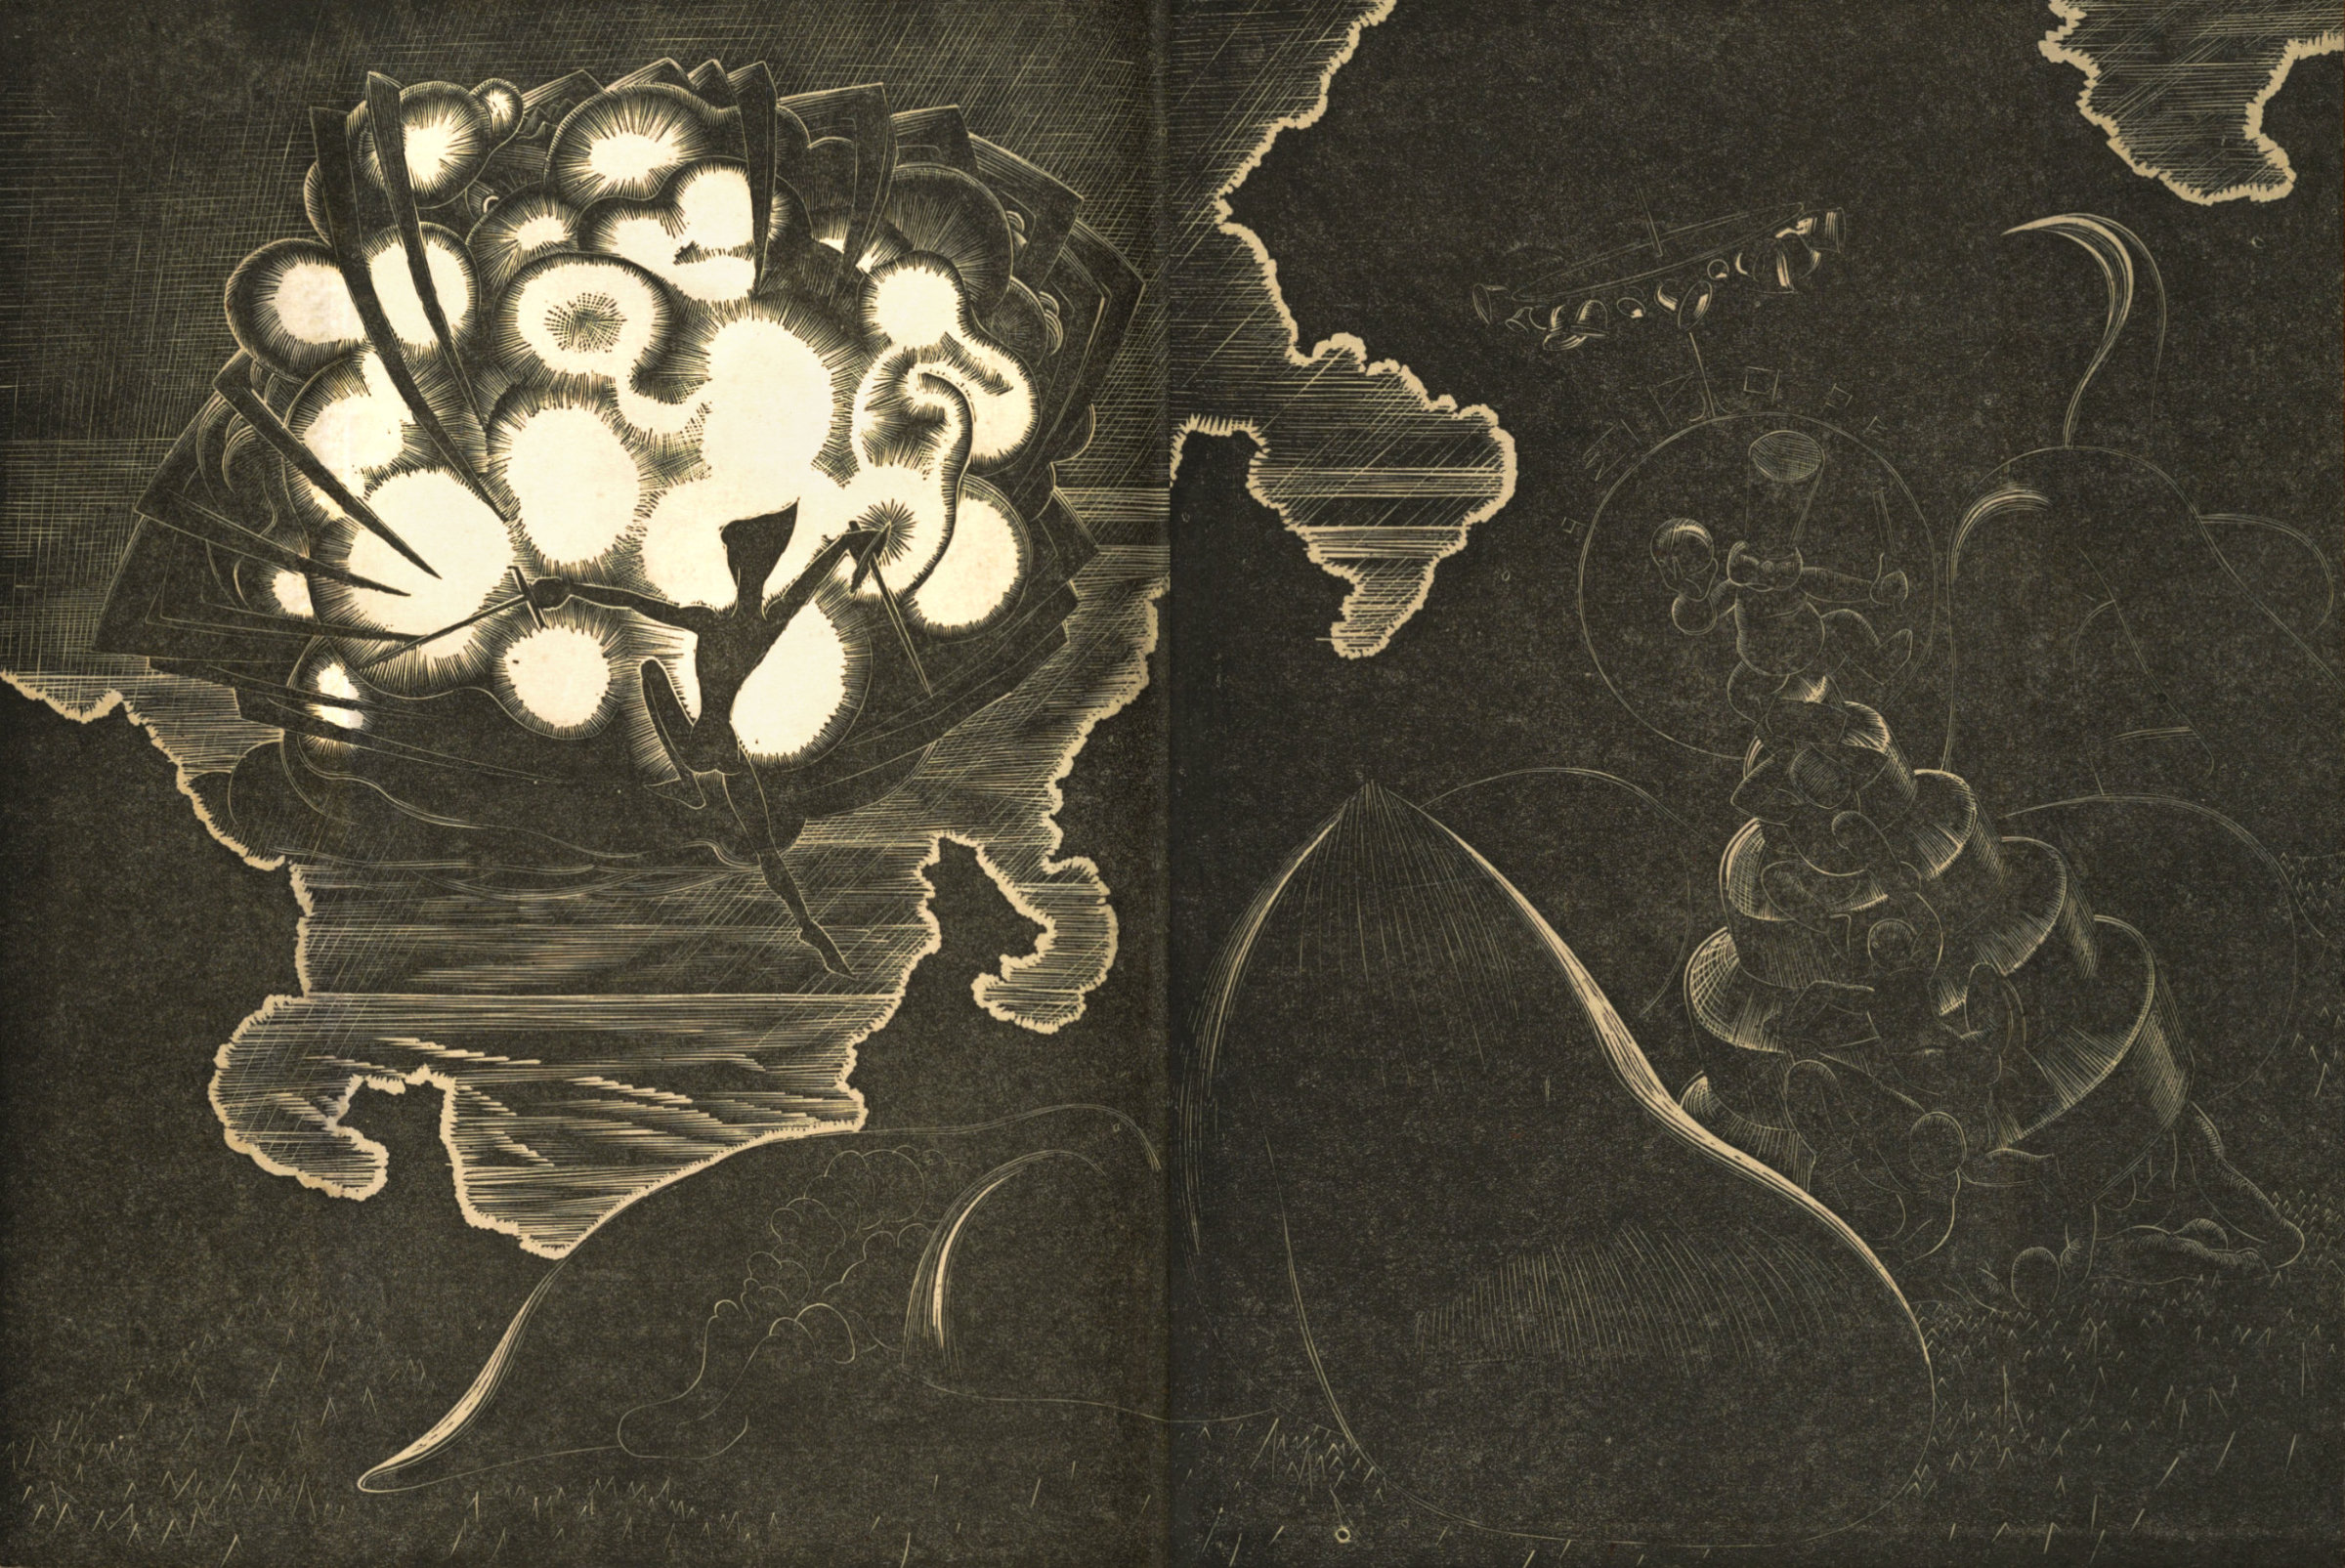 Abstract two-page spread woodcut with a Peter Pan-like figure on the left with a sword in each hand facing a dozen or more legged spider with his legs surrounding several lights; on the right is a round-bodied entity on top of a series of cylindrical structures with several men trying to climb up to reach him.